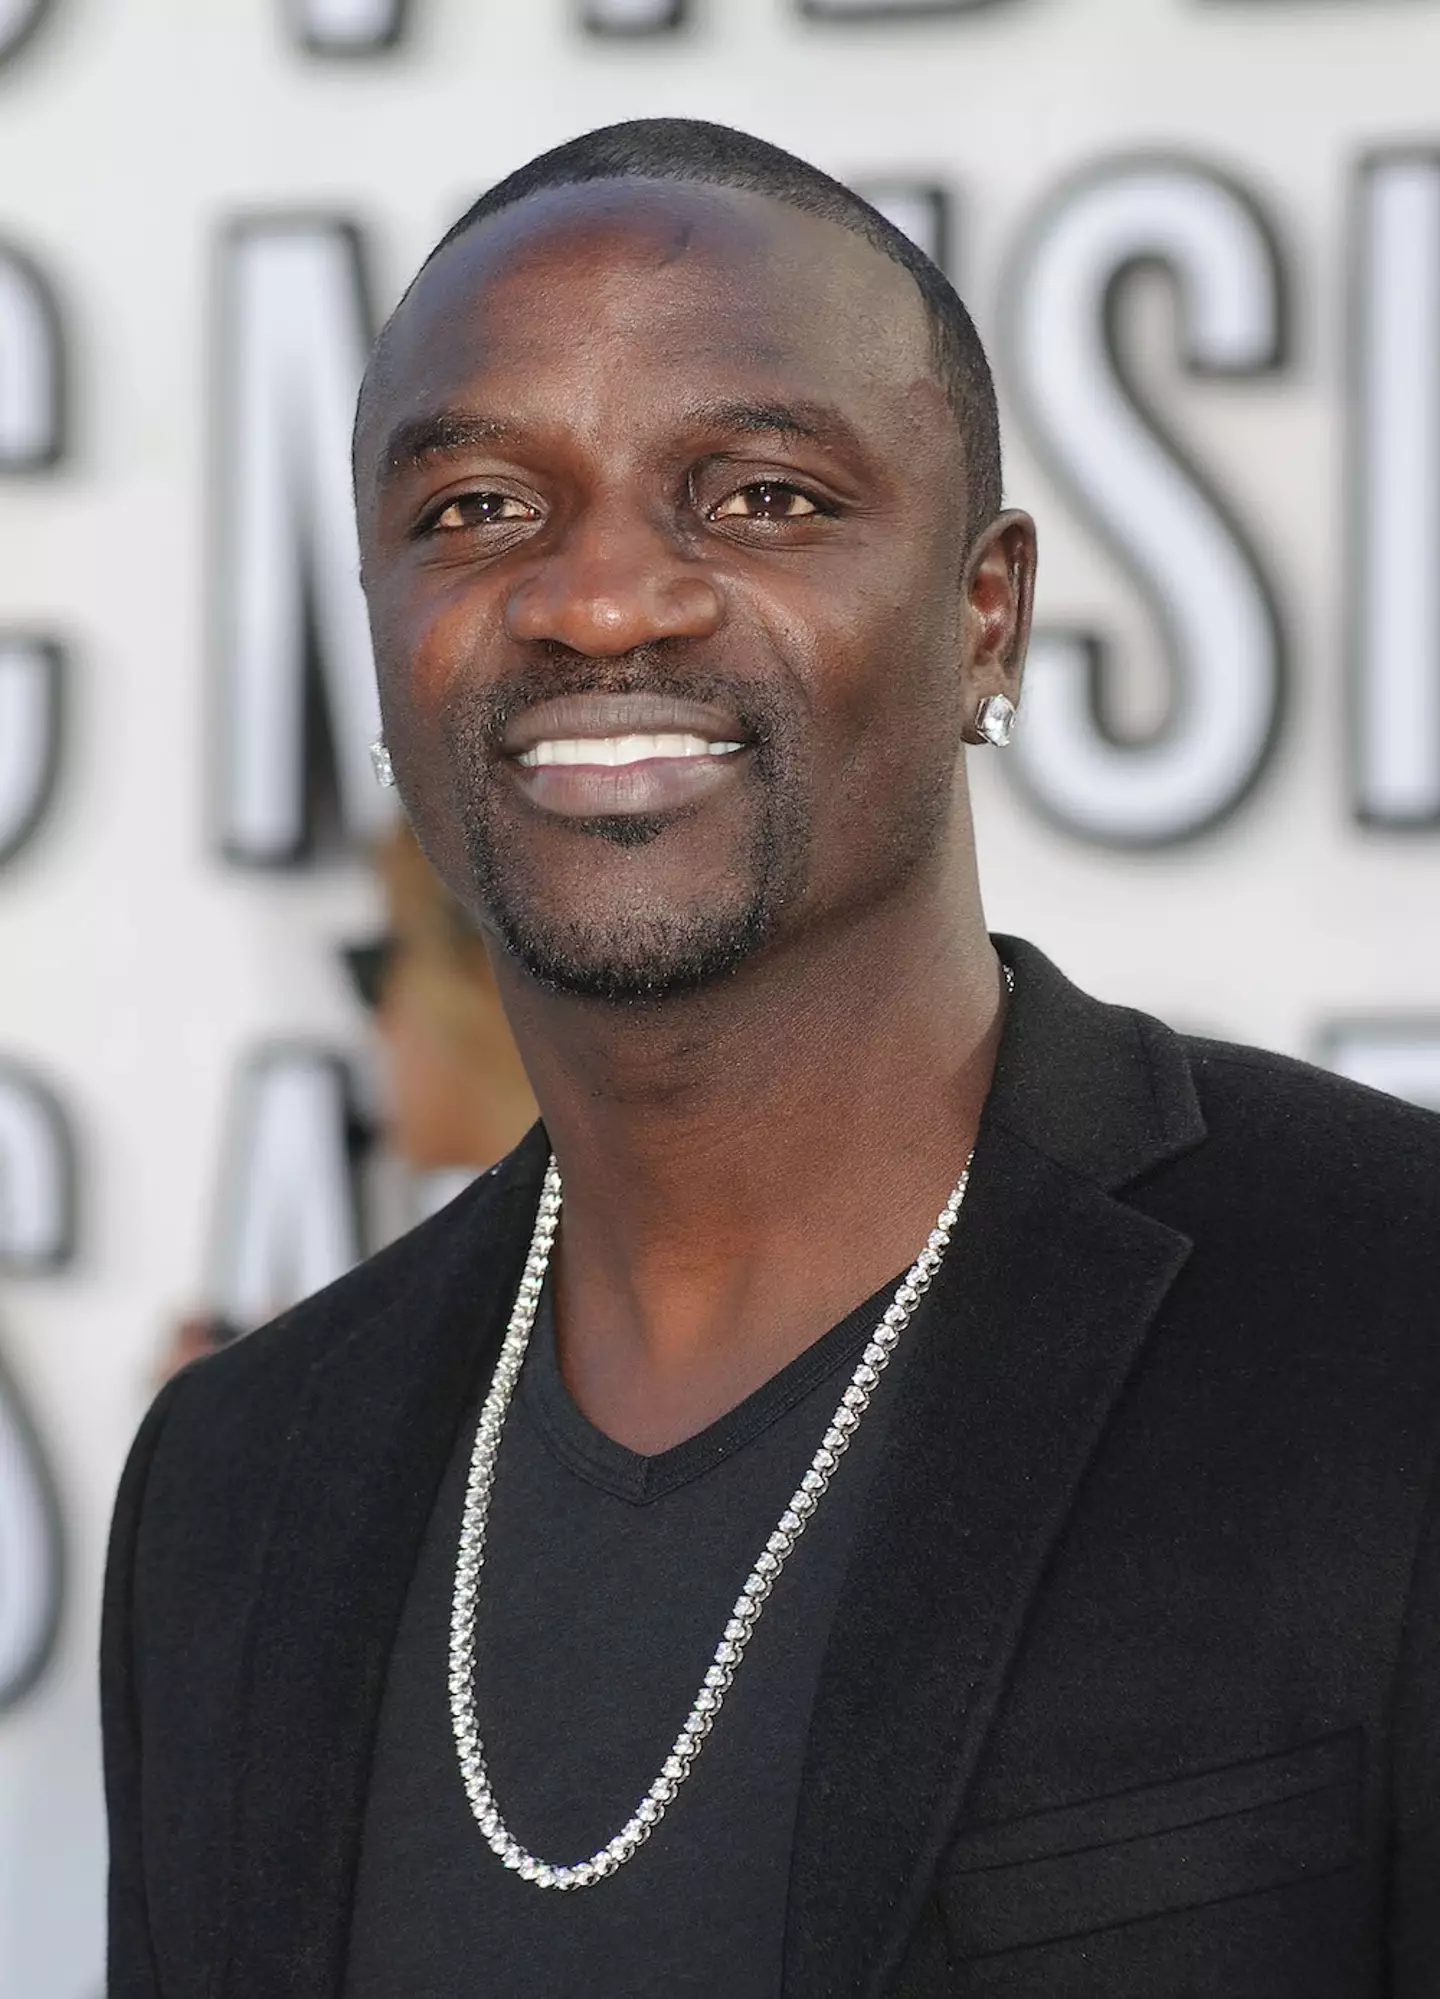 Akon told people to focus on helping to solve the problem rather than criticising others' ideas.